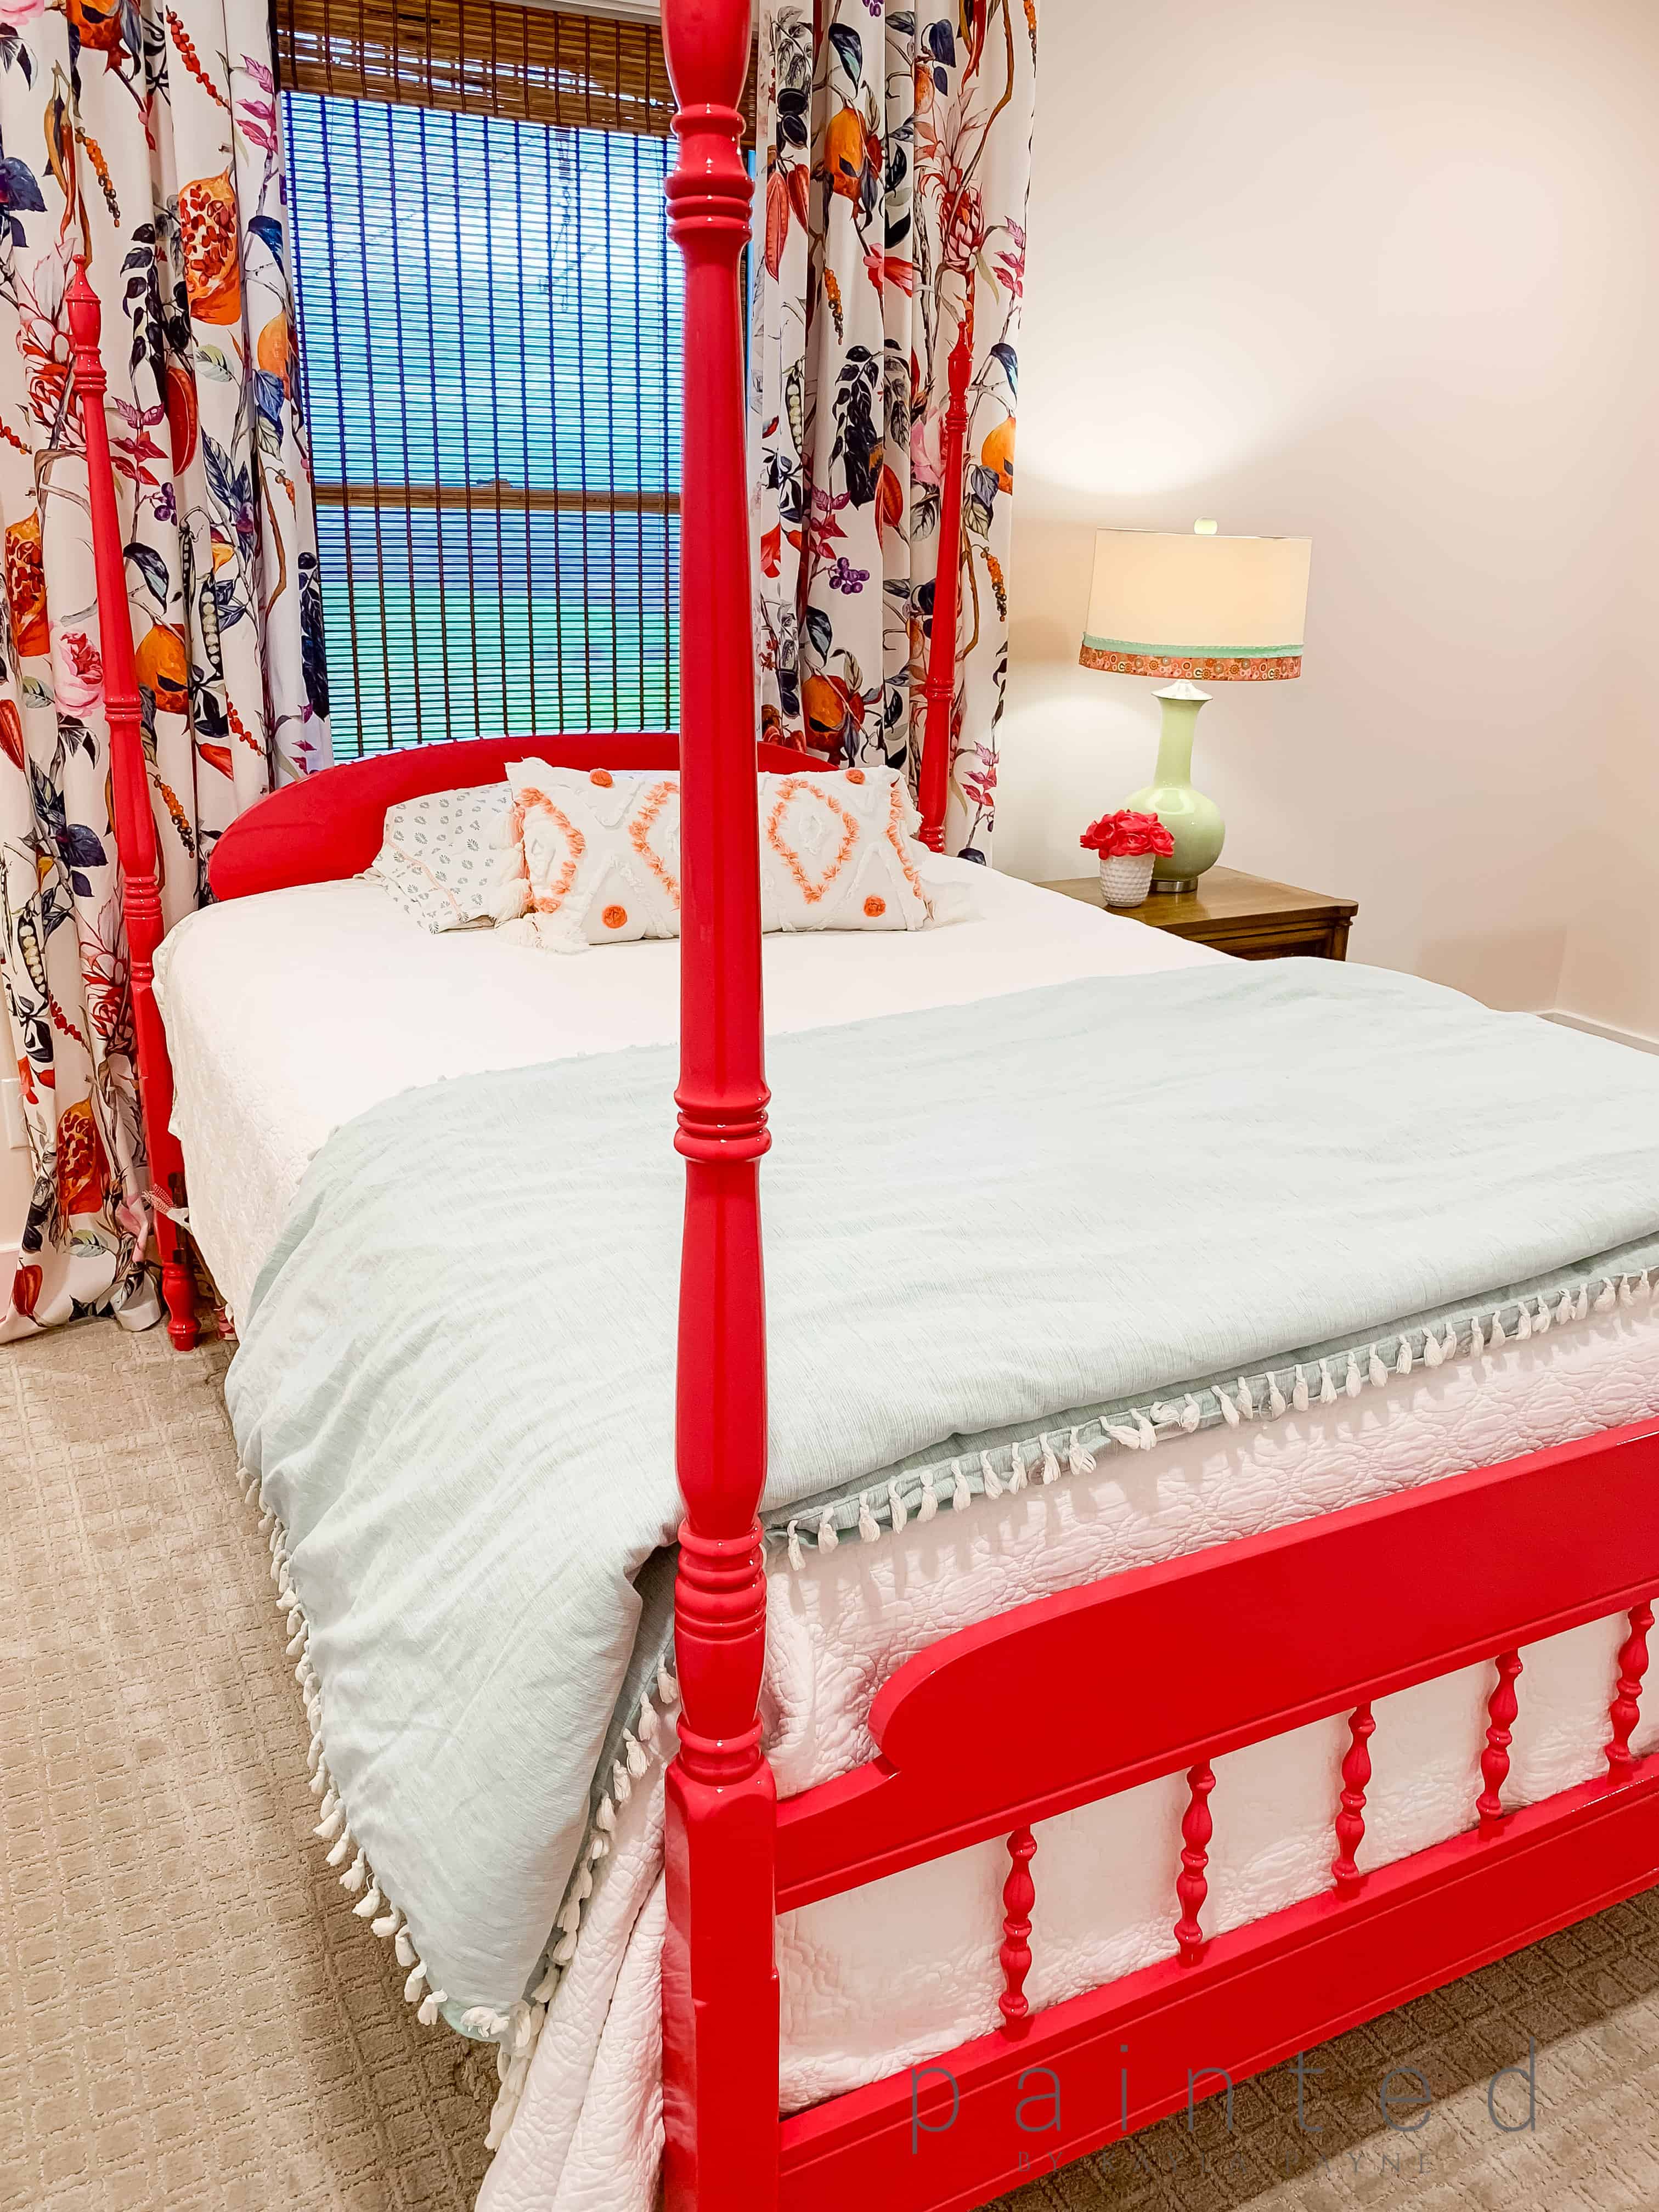 Little girl bedroom decorating ideas. Hot pink lacquered four post bed!